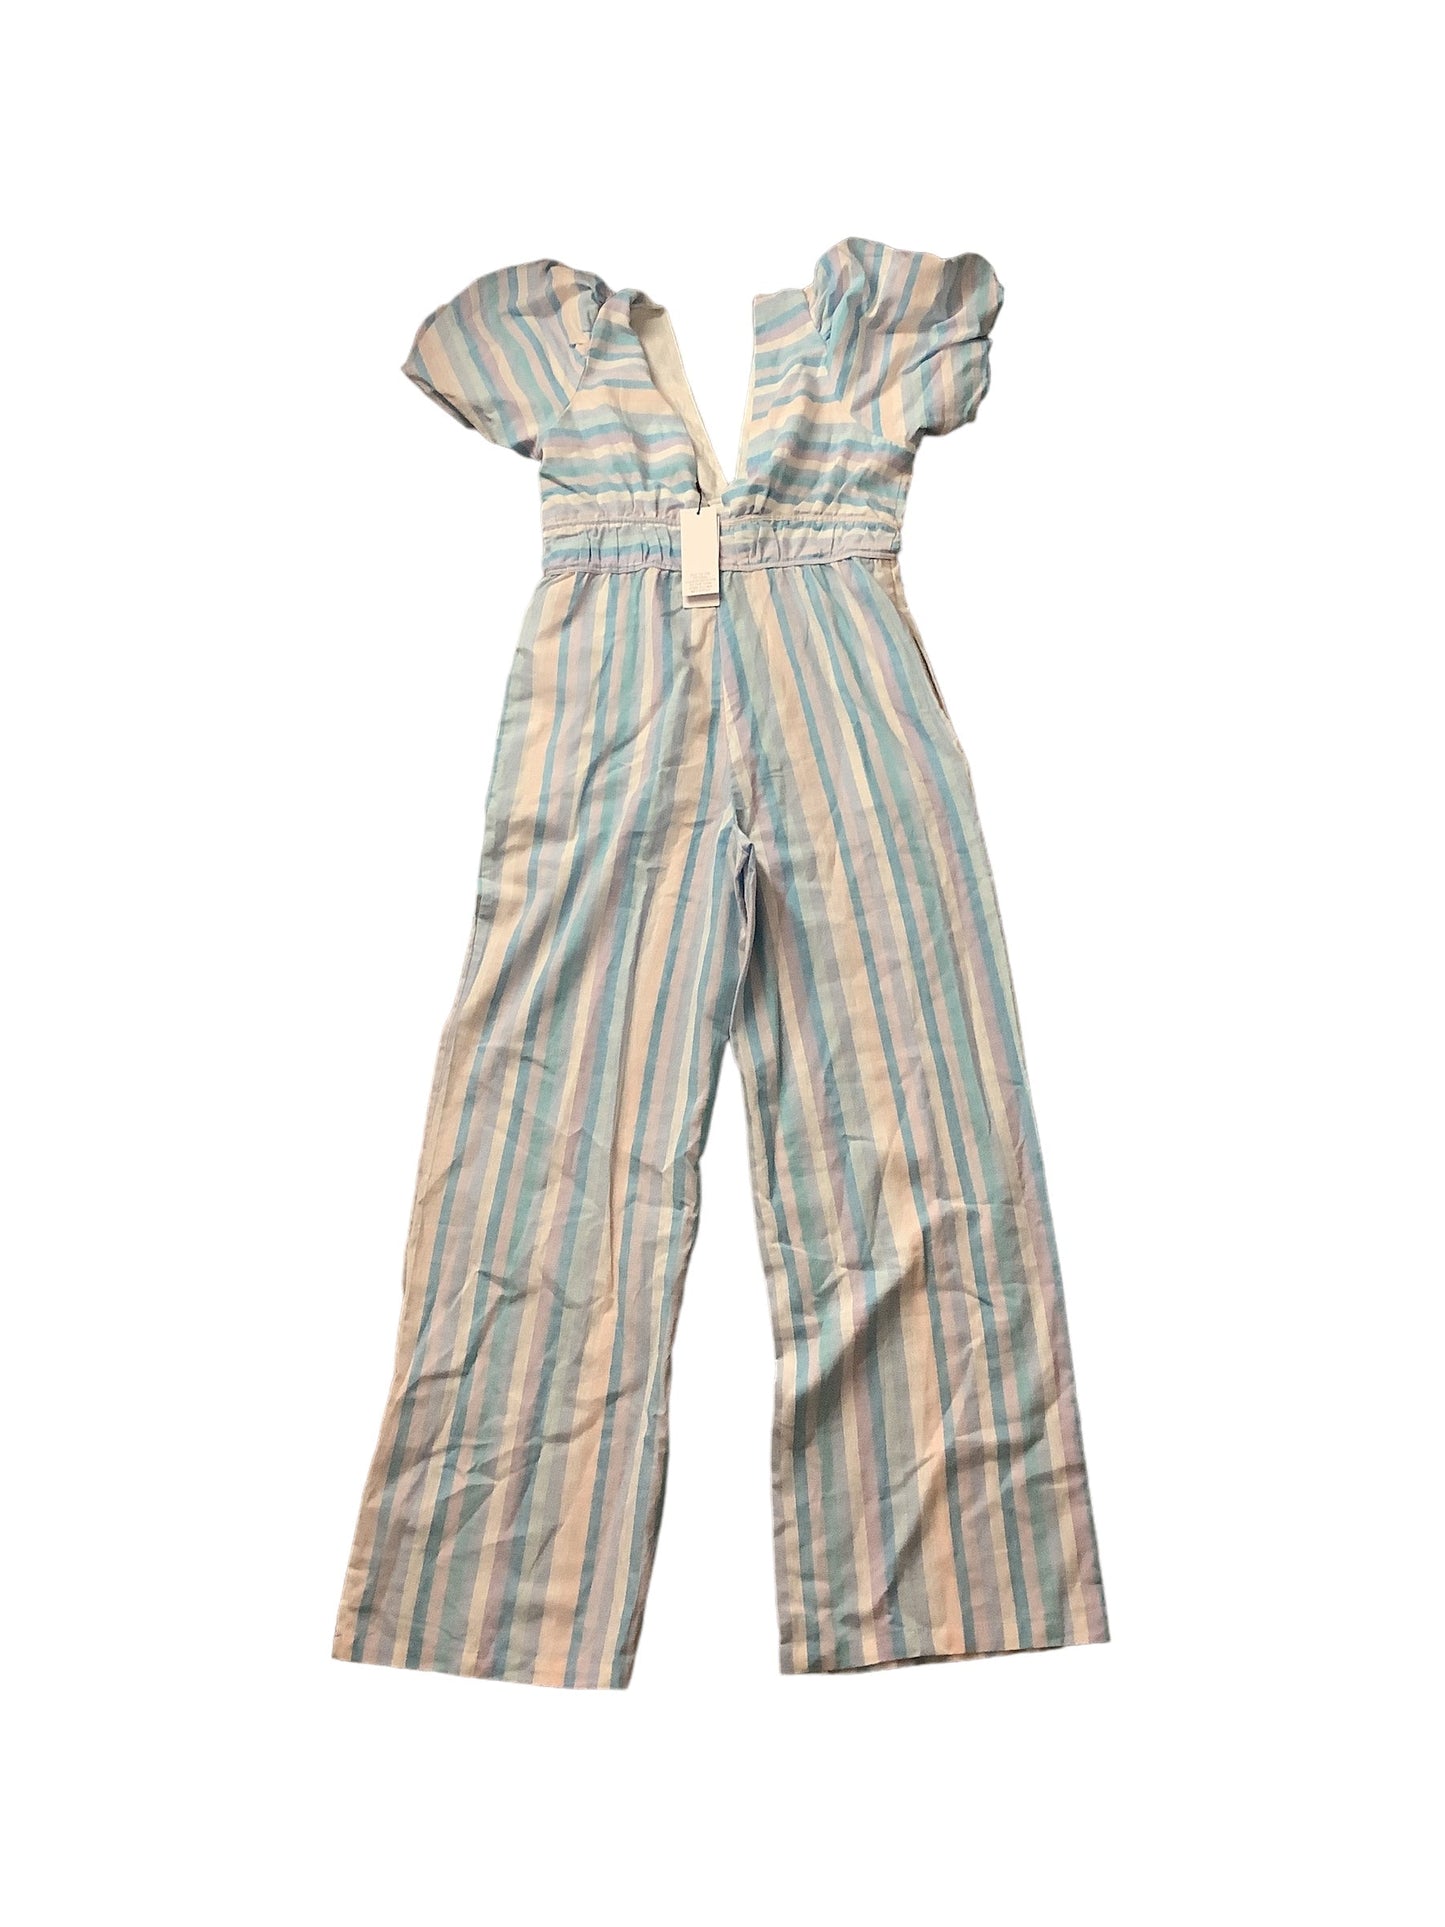 Striped Pattern Jumpsuit Clothes Mentor, Size 12